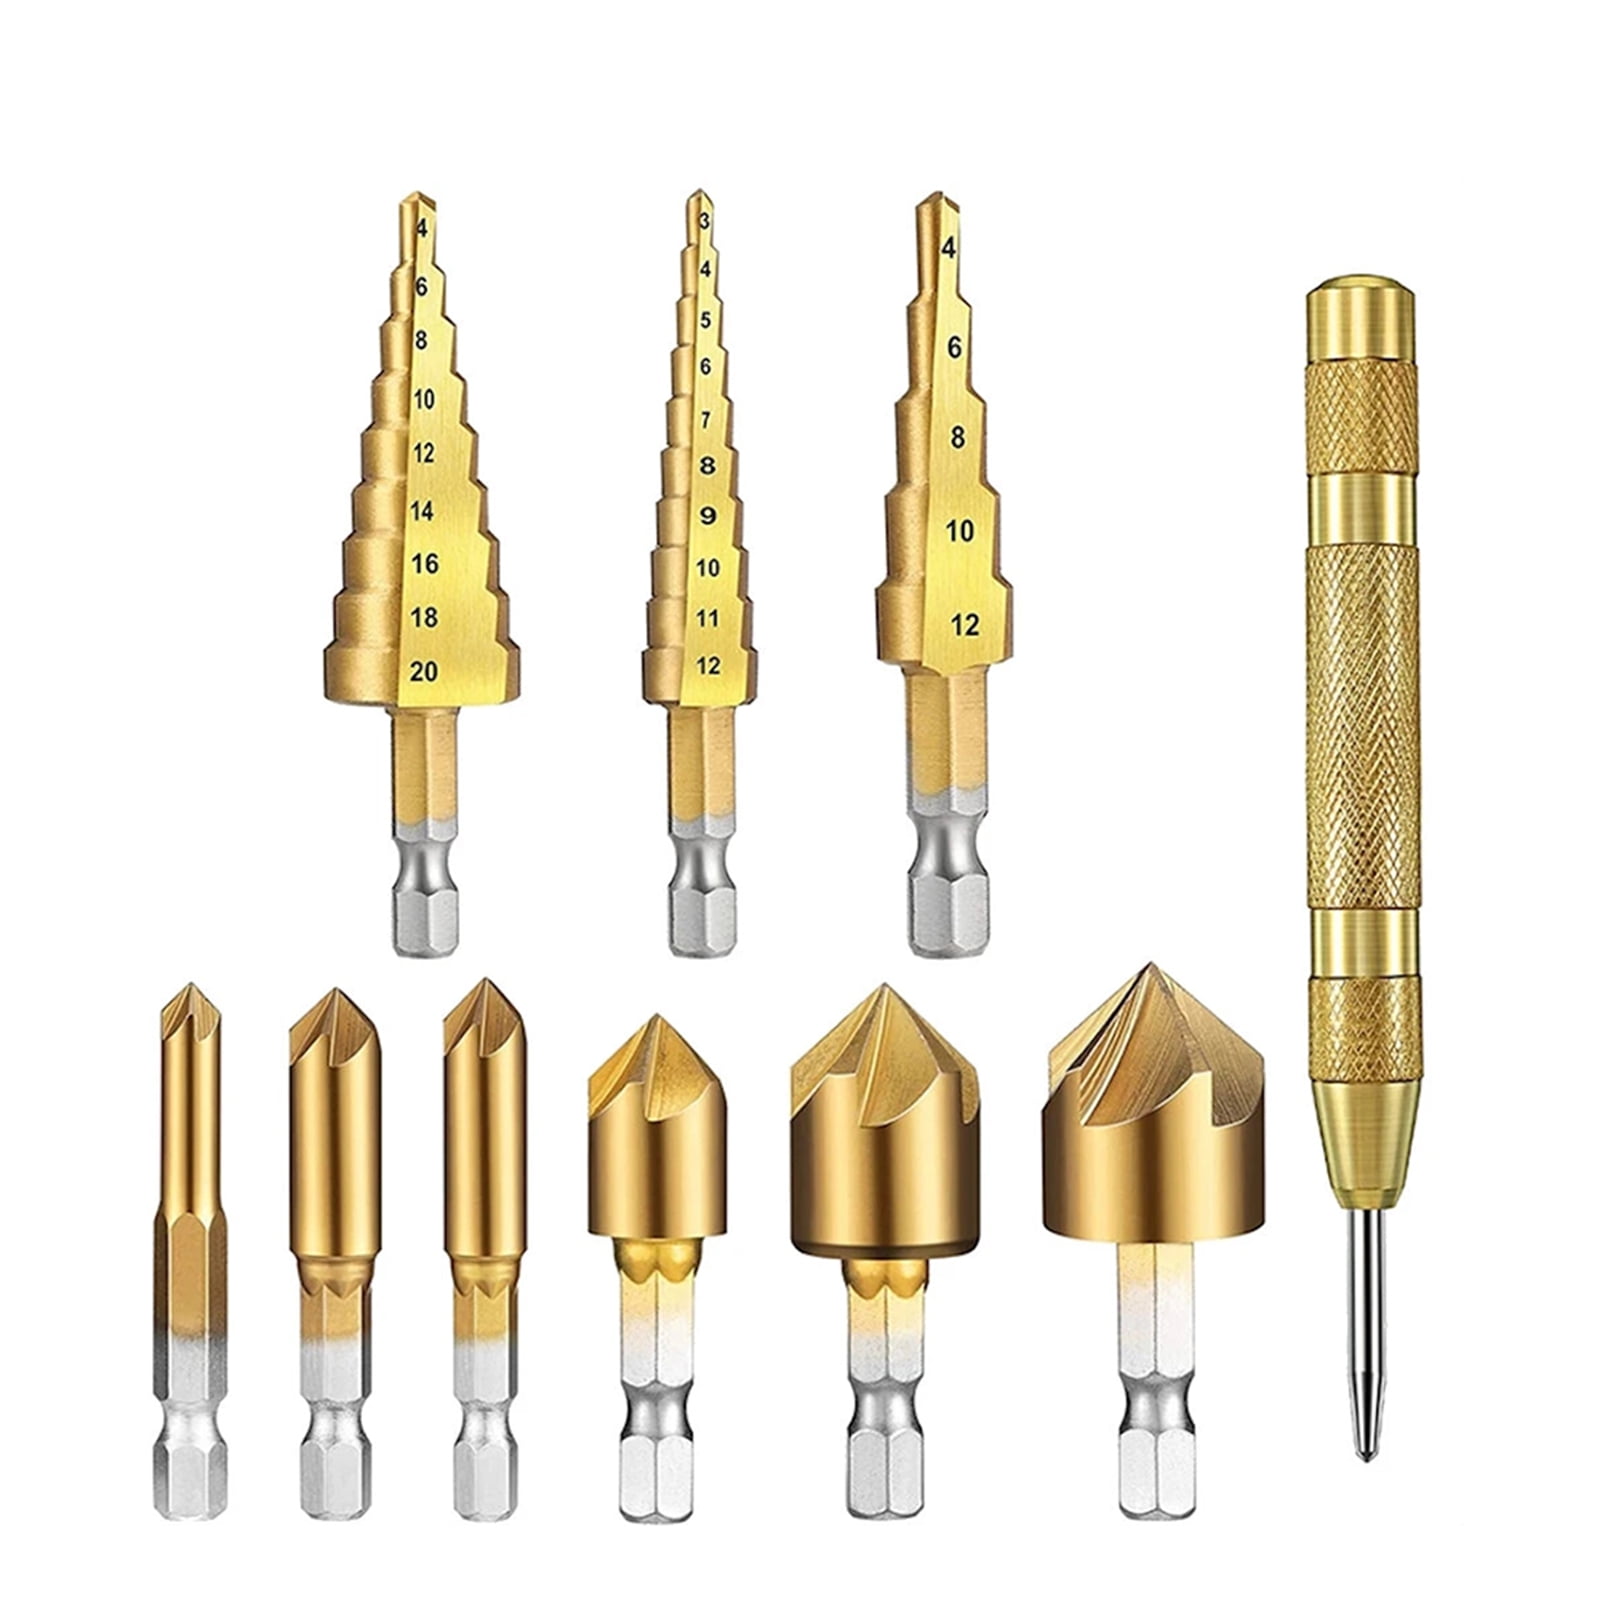 6 Pieces Titanium Coated Straight and Spiral Step Drill Bit Set Hex Shank Kit for Iron Plate Aluminum PVC Board 4Mm T